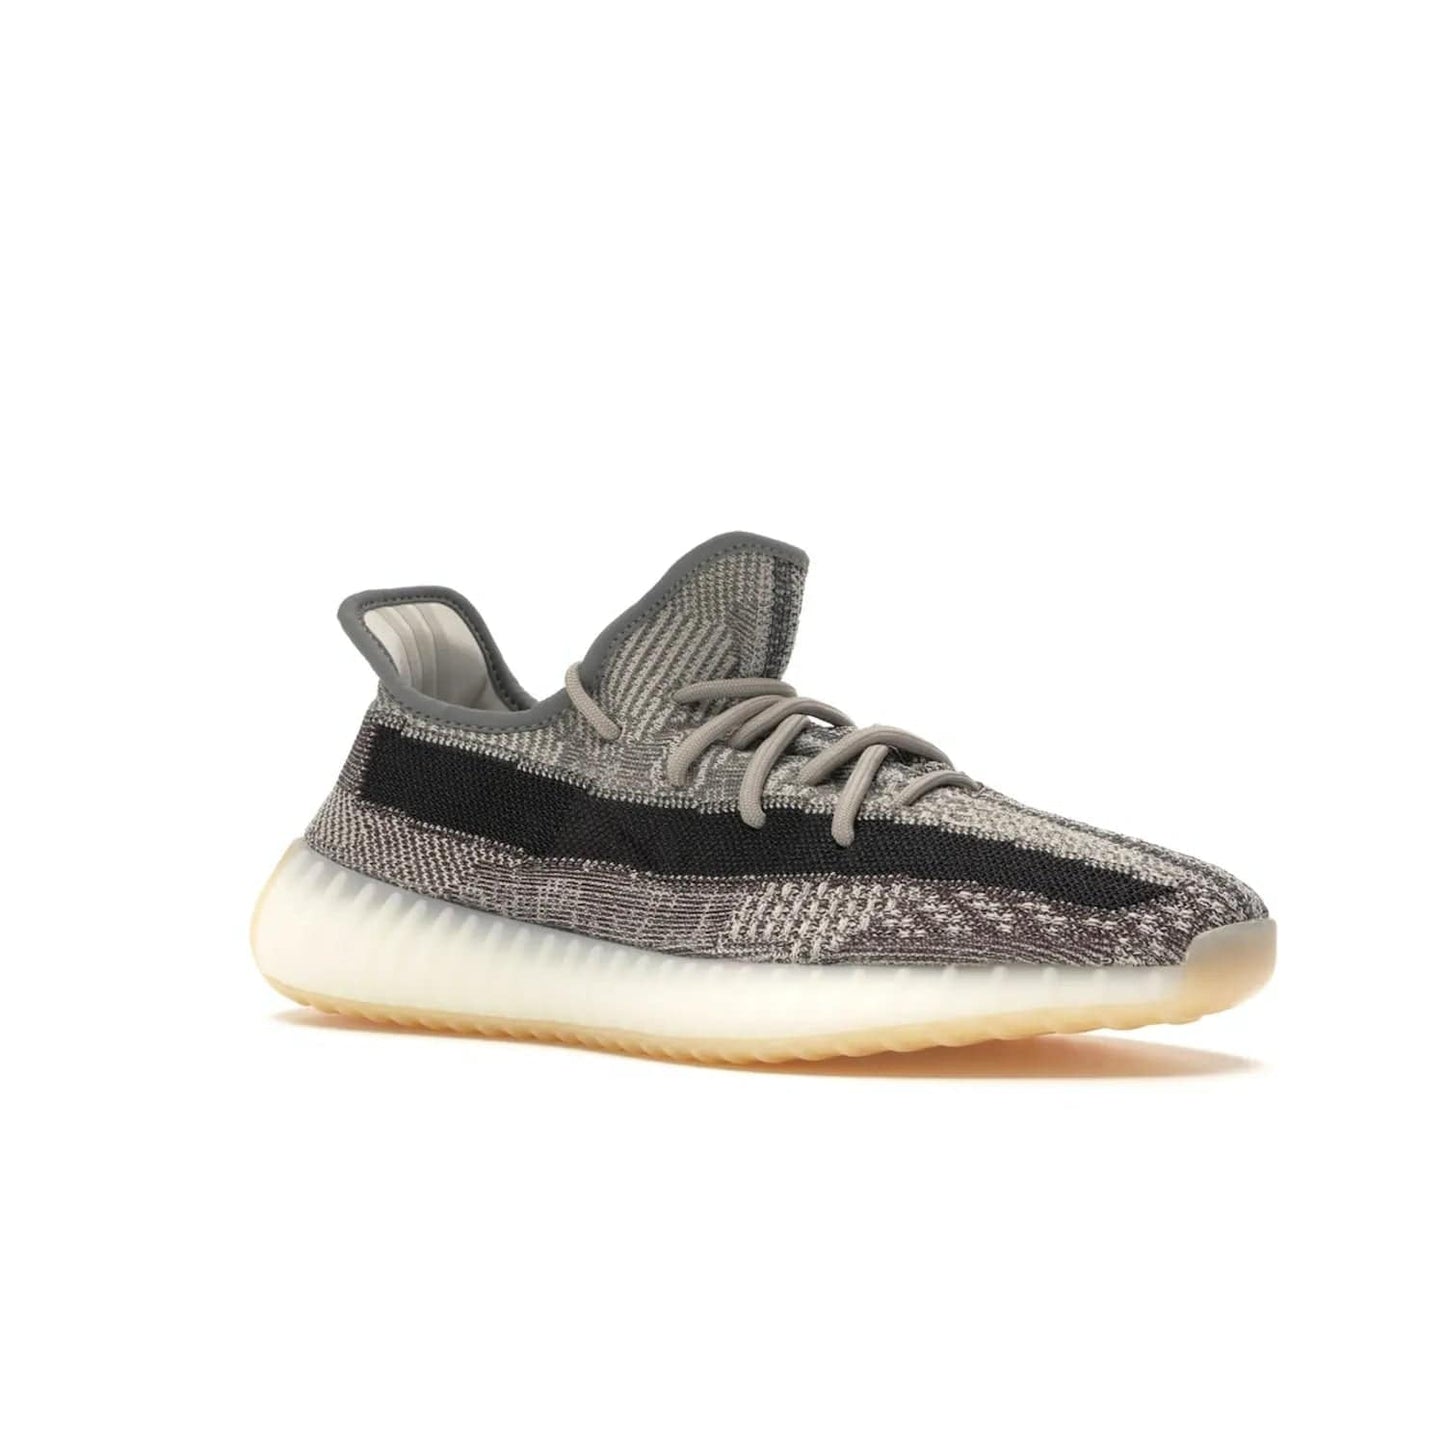 adidas Yeezy Boost 350 V2 Zyon - Image 4 - Only at www.BallersClubKickz.com - Step up your style game with the adidas Yeezy Boost 350 V2 Zyon. This sleek sneaker features a Primeknit upper, dark side stripe, translucent Boost sole, and creamy white interior providing style and comfort. Get them now!